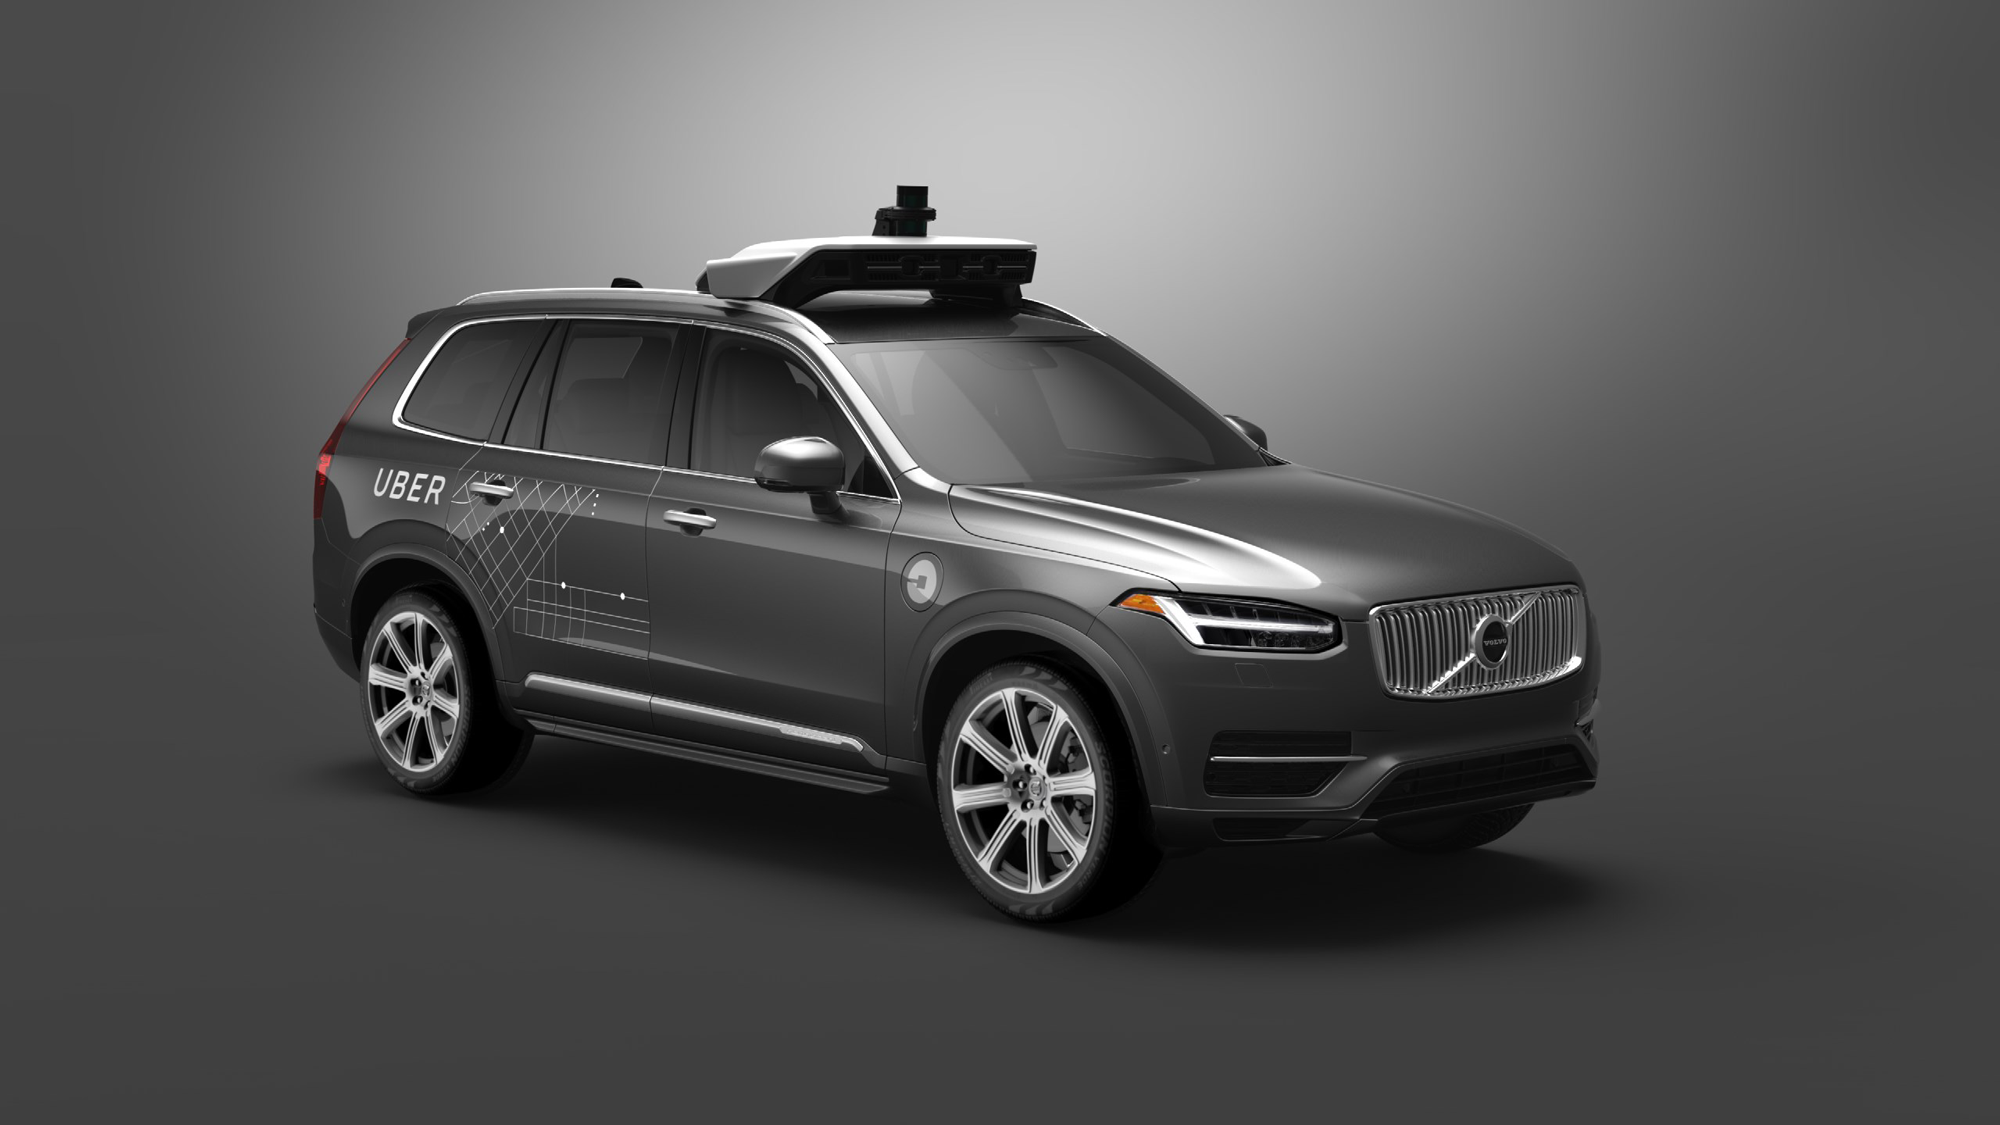 A Volvo SUV with automated driving technology developed by Uber.